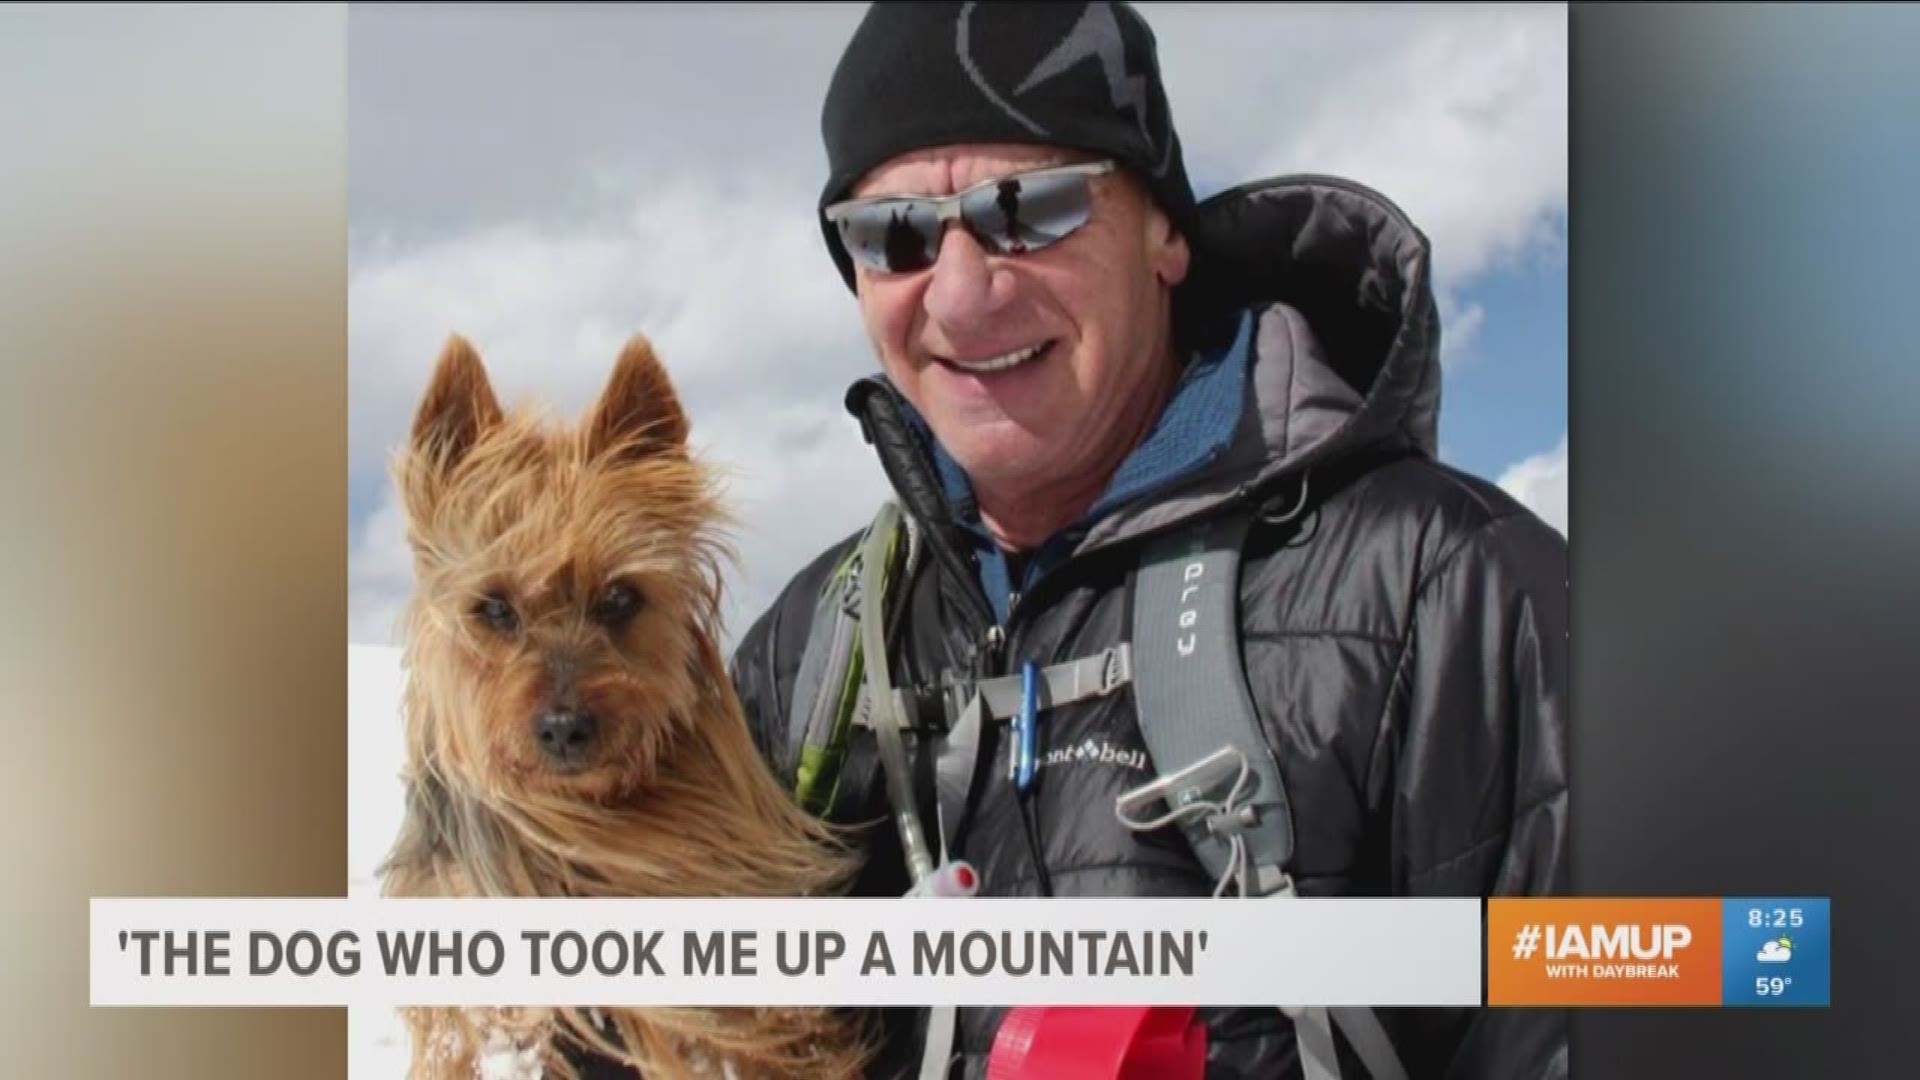 Interview with Rick Crandall: Author of "The Dog Who Took Me Up a Mountain"